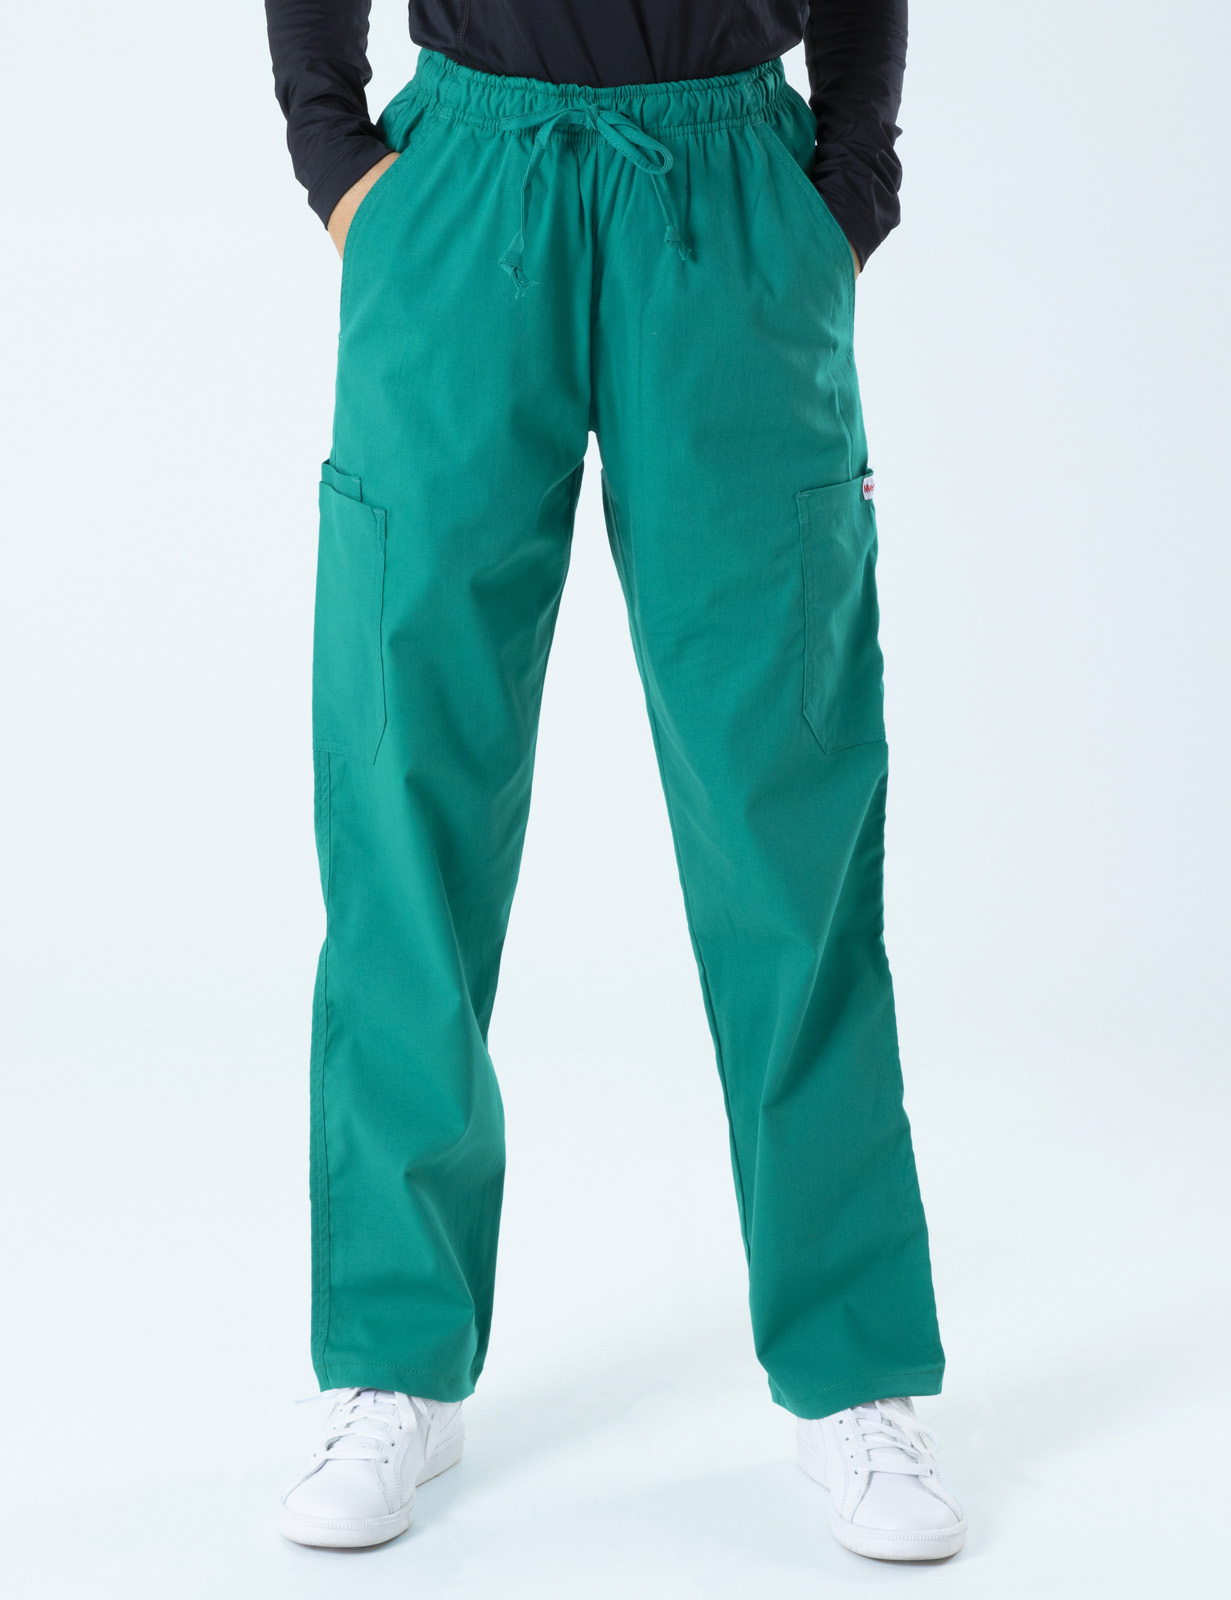 Canberra Hospital - ED Doctor (Women's Fit Solid Scrub Top and Cargo Pants in Hunter incl Logos)